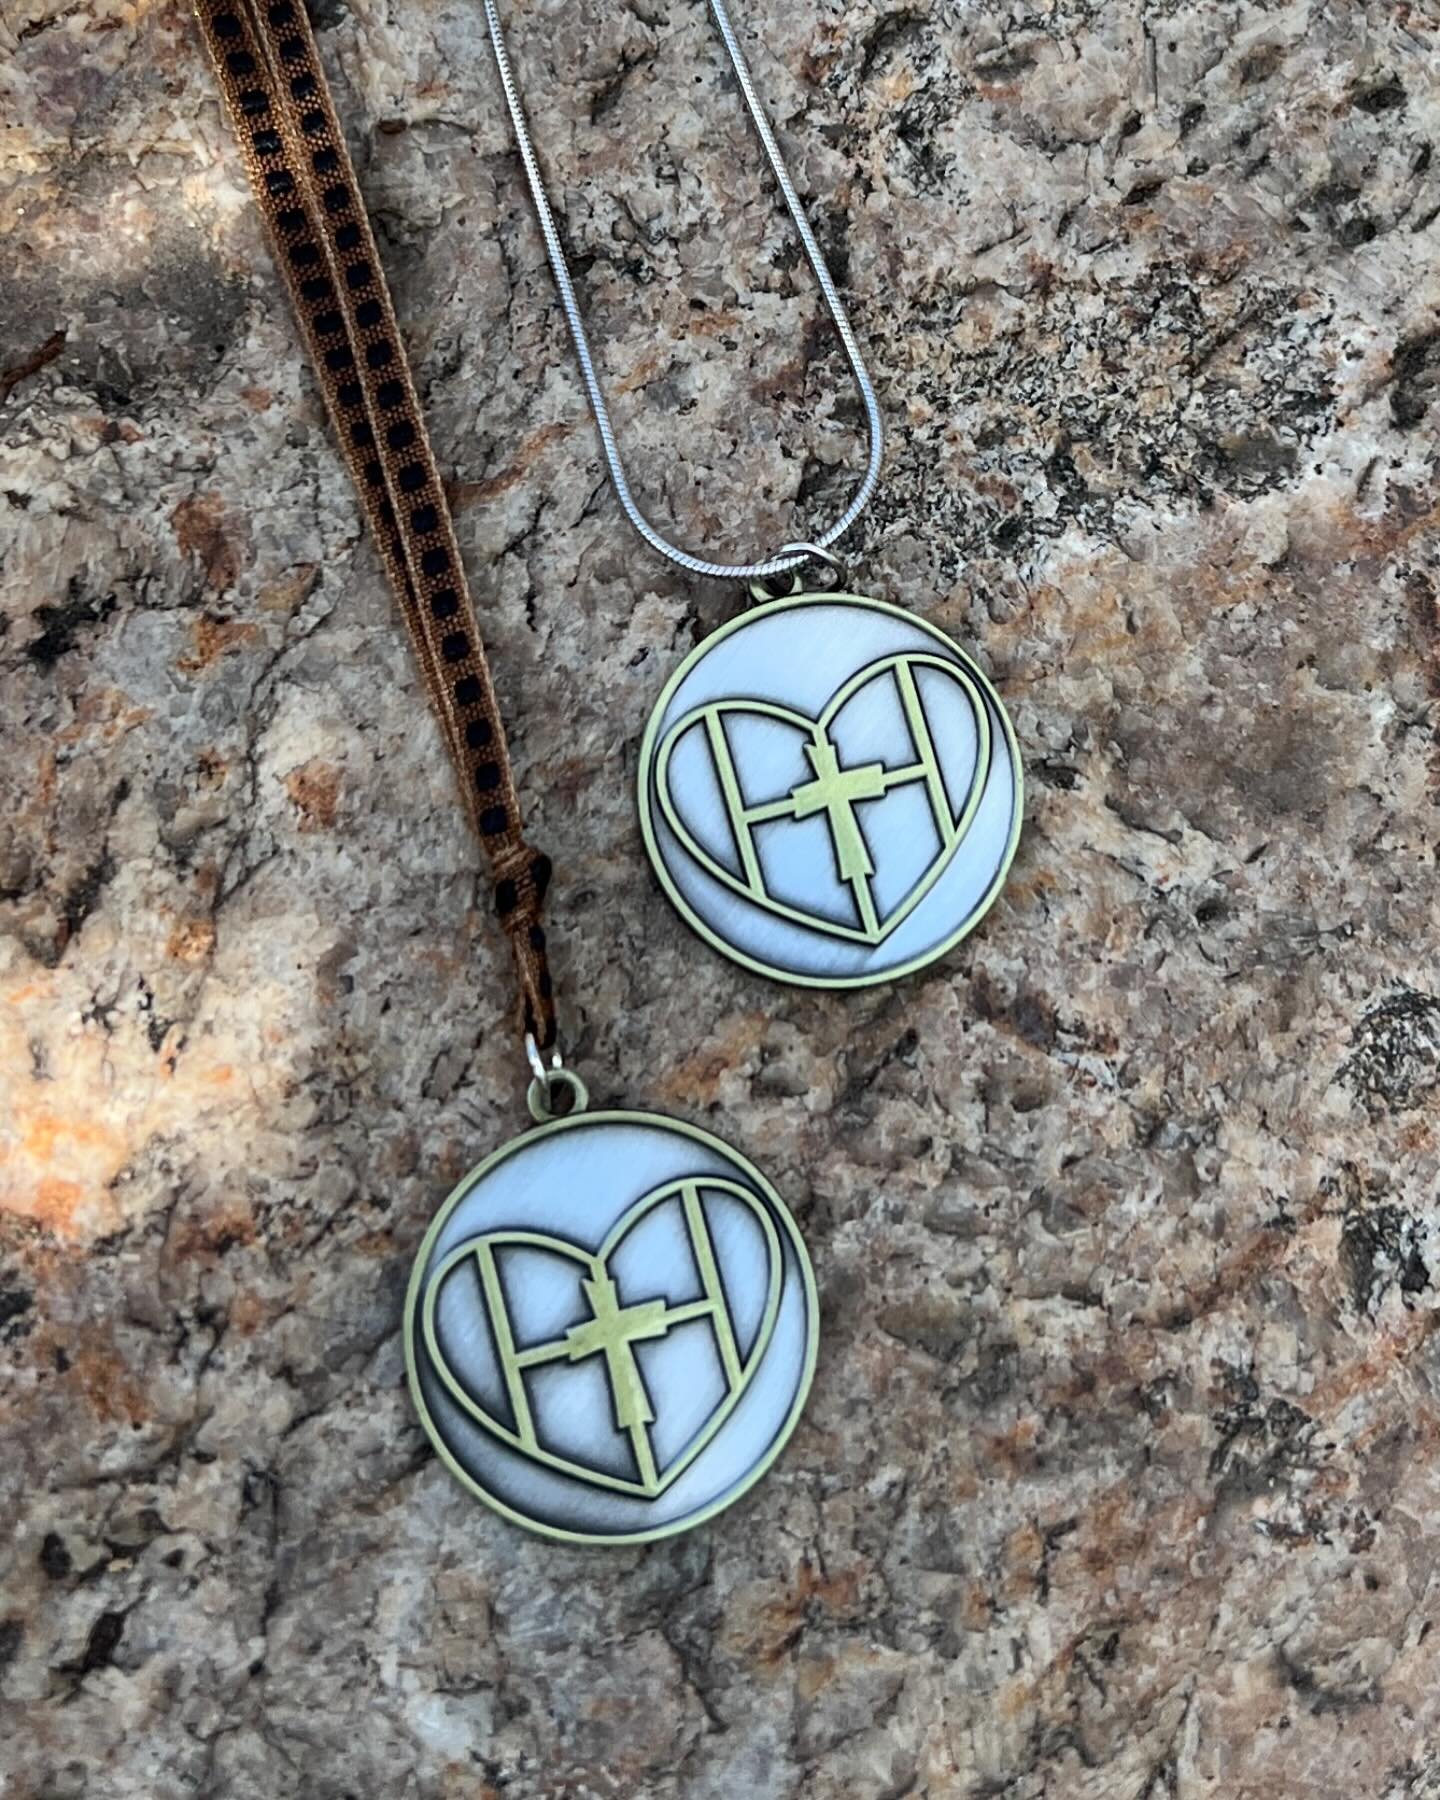 Love this!!

I wanted to bring something new and unique to the gatherings I&rsquo;m attending in May. 

Not only did my talented son-in-law set up my website and help me with my initial emails, he also designed the logo for Humble Hearts Clergy Appar